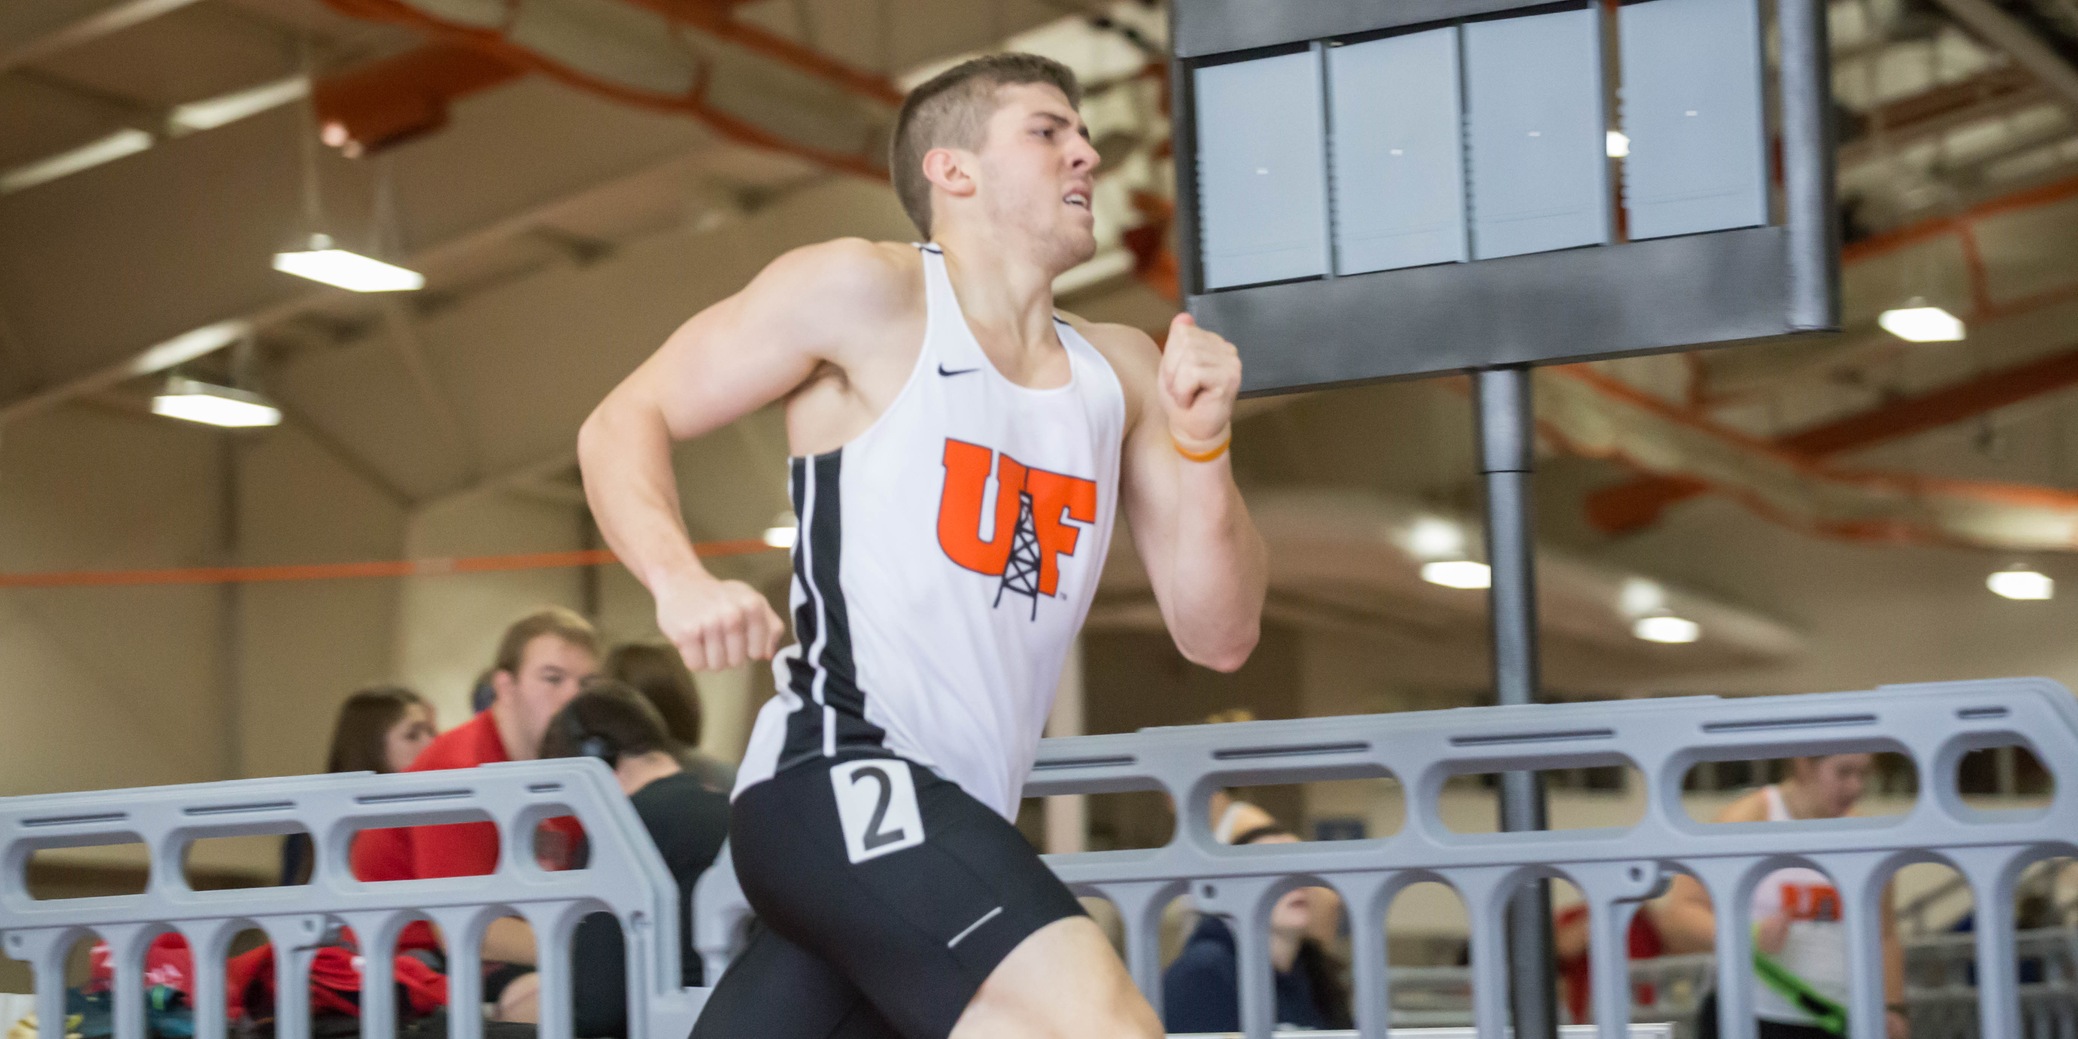 Oilers Complete Day 1 at G-MAC Championship